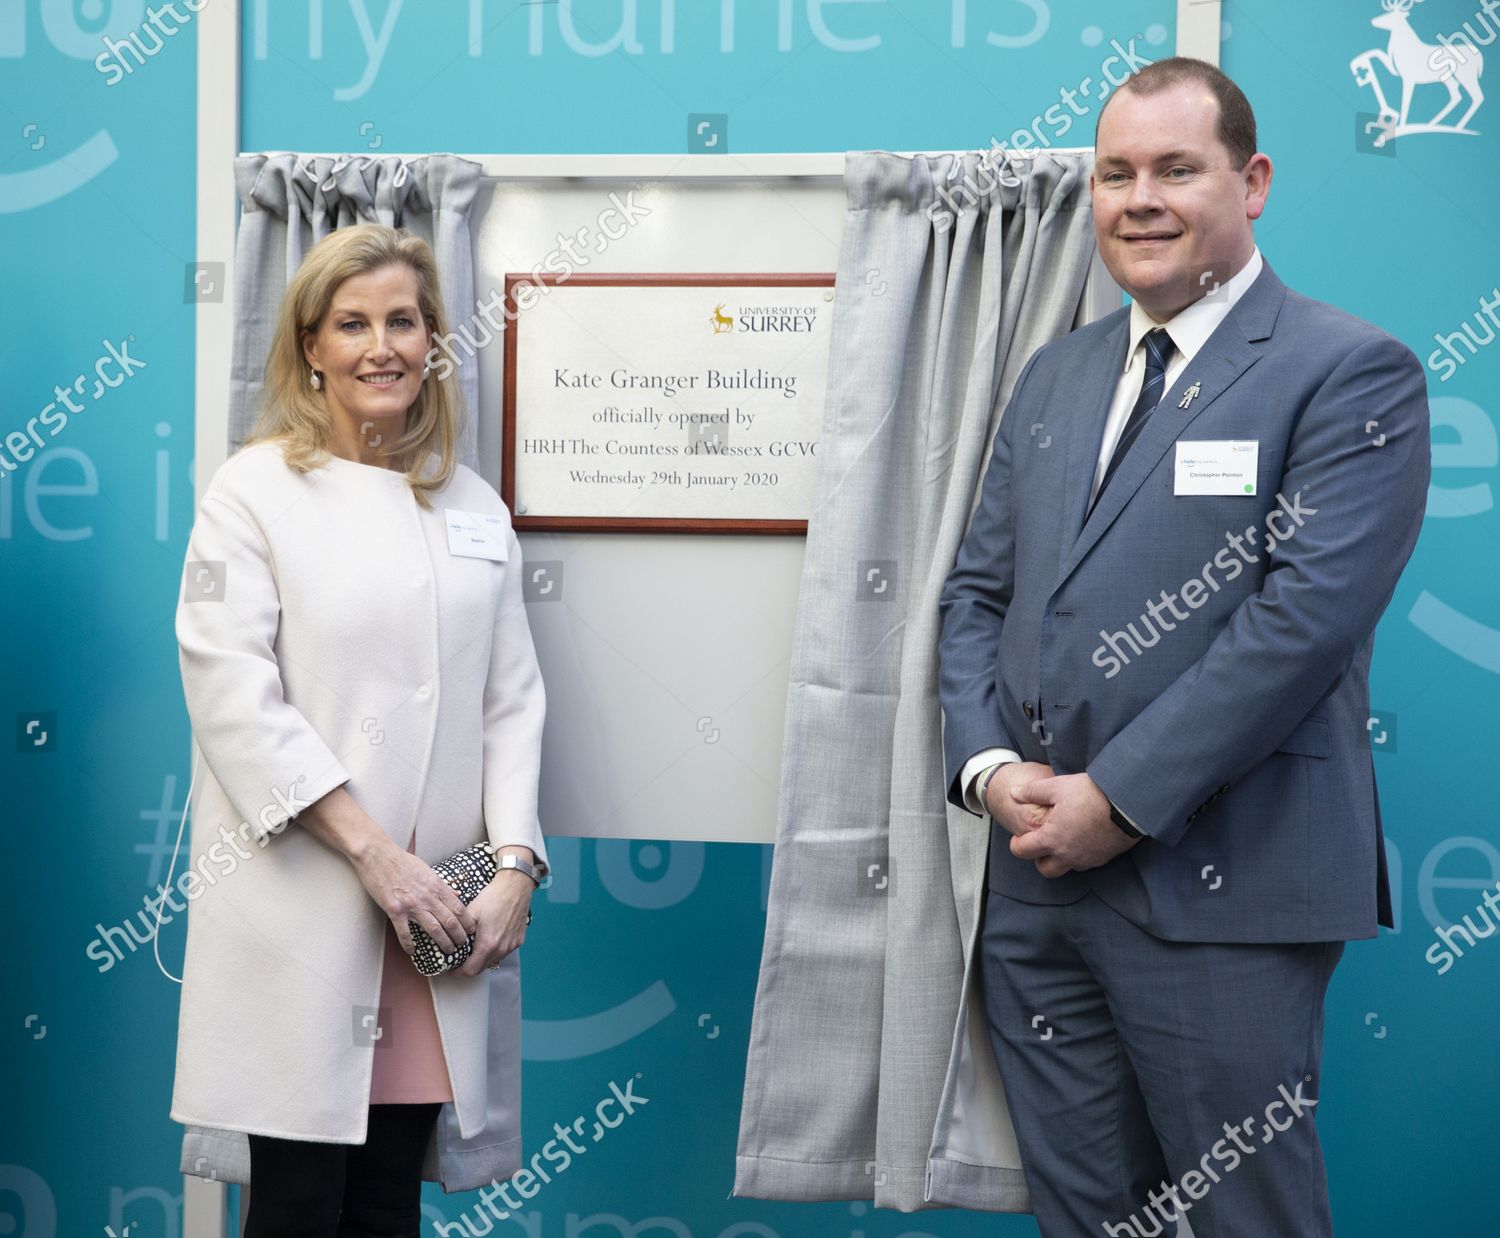 CASA REAL BRITÁNICA - Página 14 Sophie-countess-of-wessex-opens-new-health-sciences-institute-university-of-surrey-guildford-uk-shutterstock-editorial-10542421ad